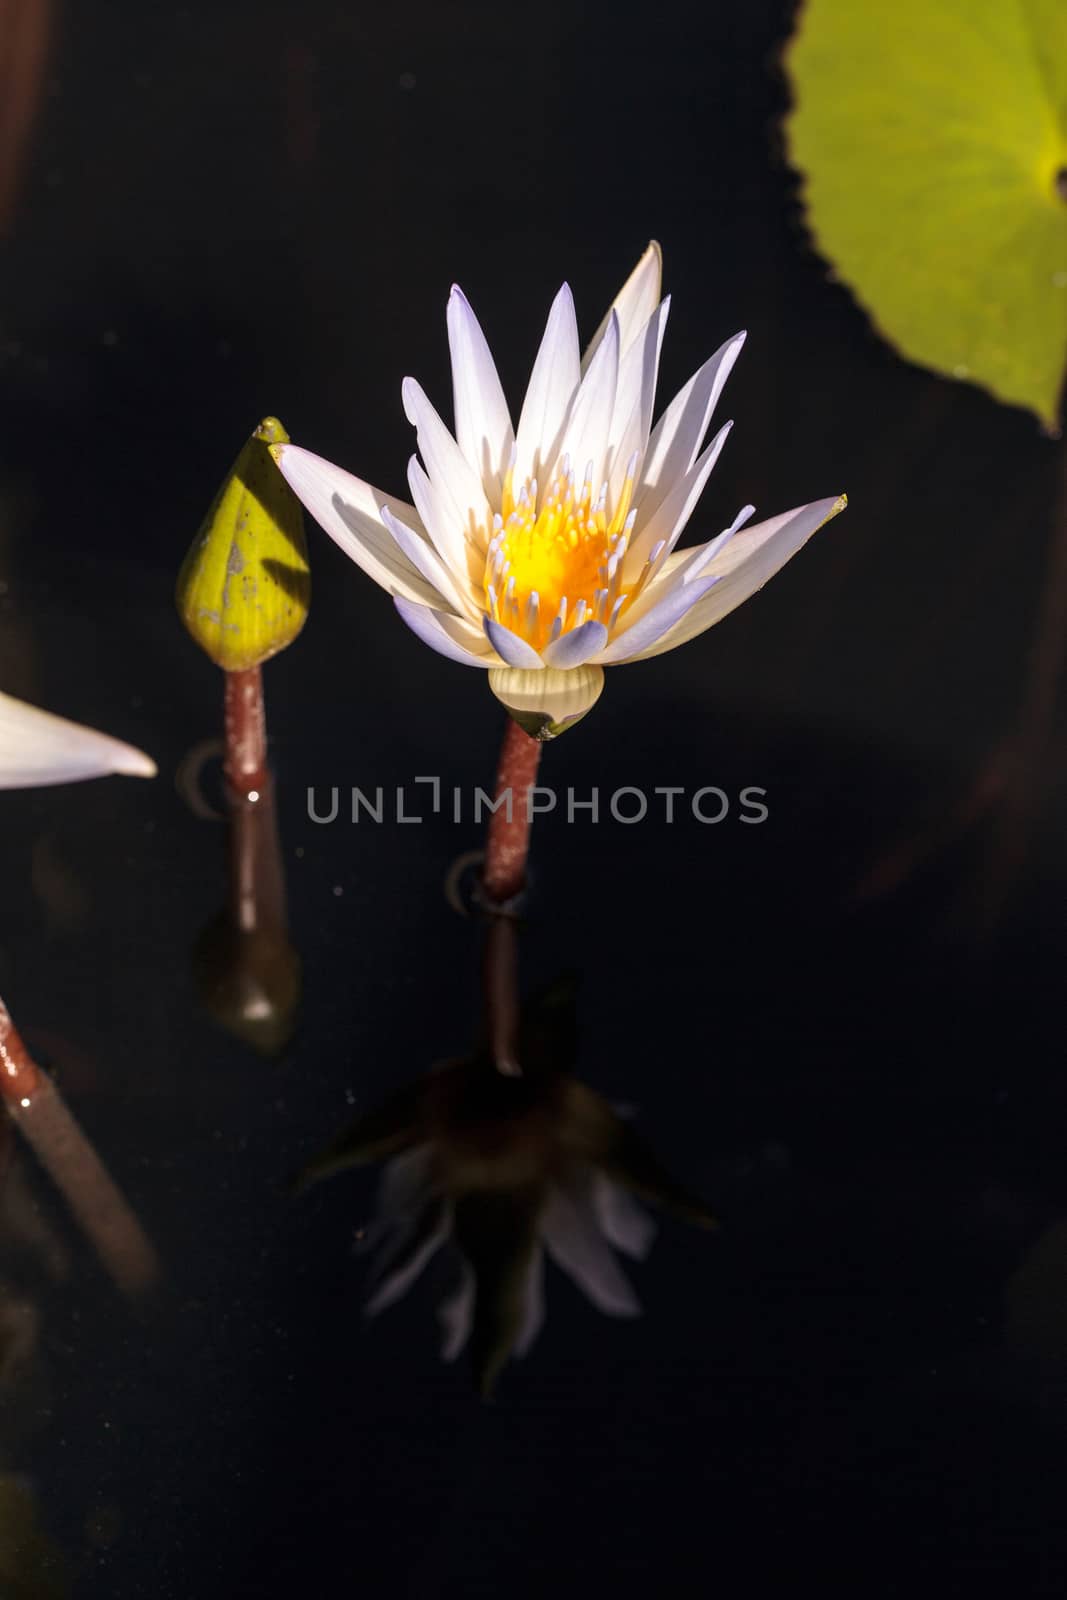 White water lily Nymphaea blooms in the Corkscrew Swamp Sanctuary in Naples, Florida